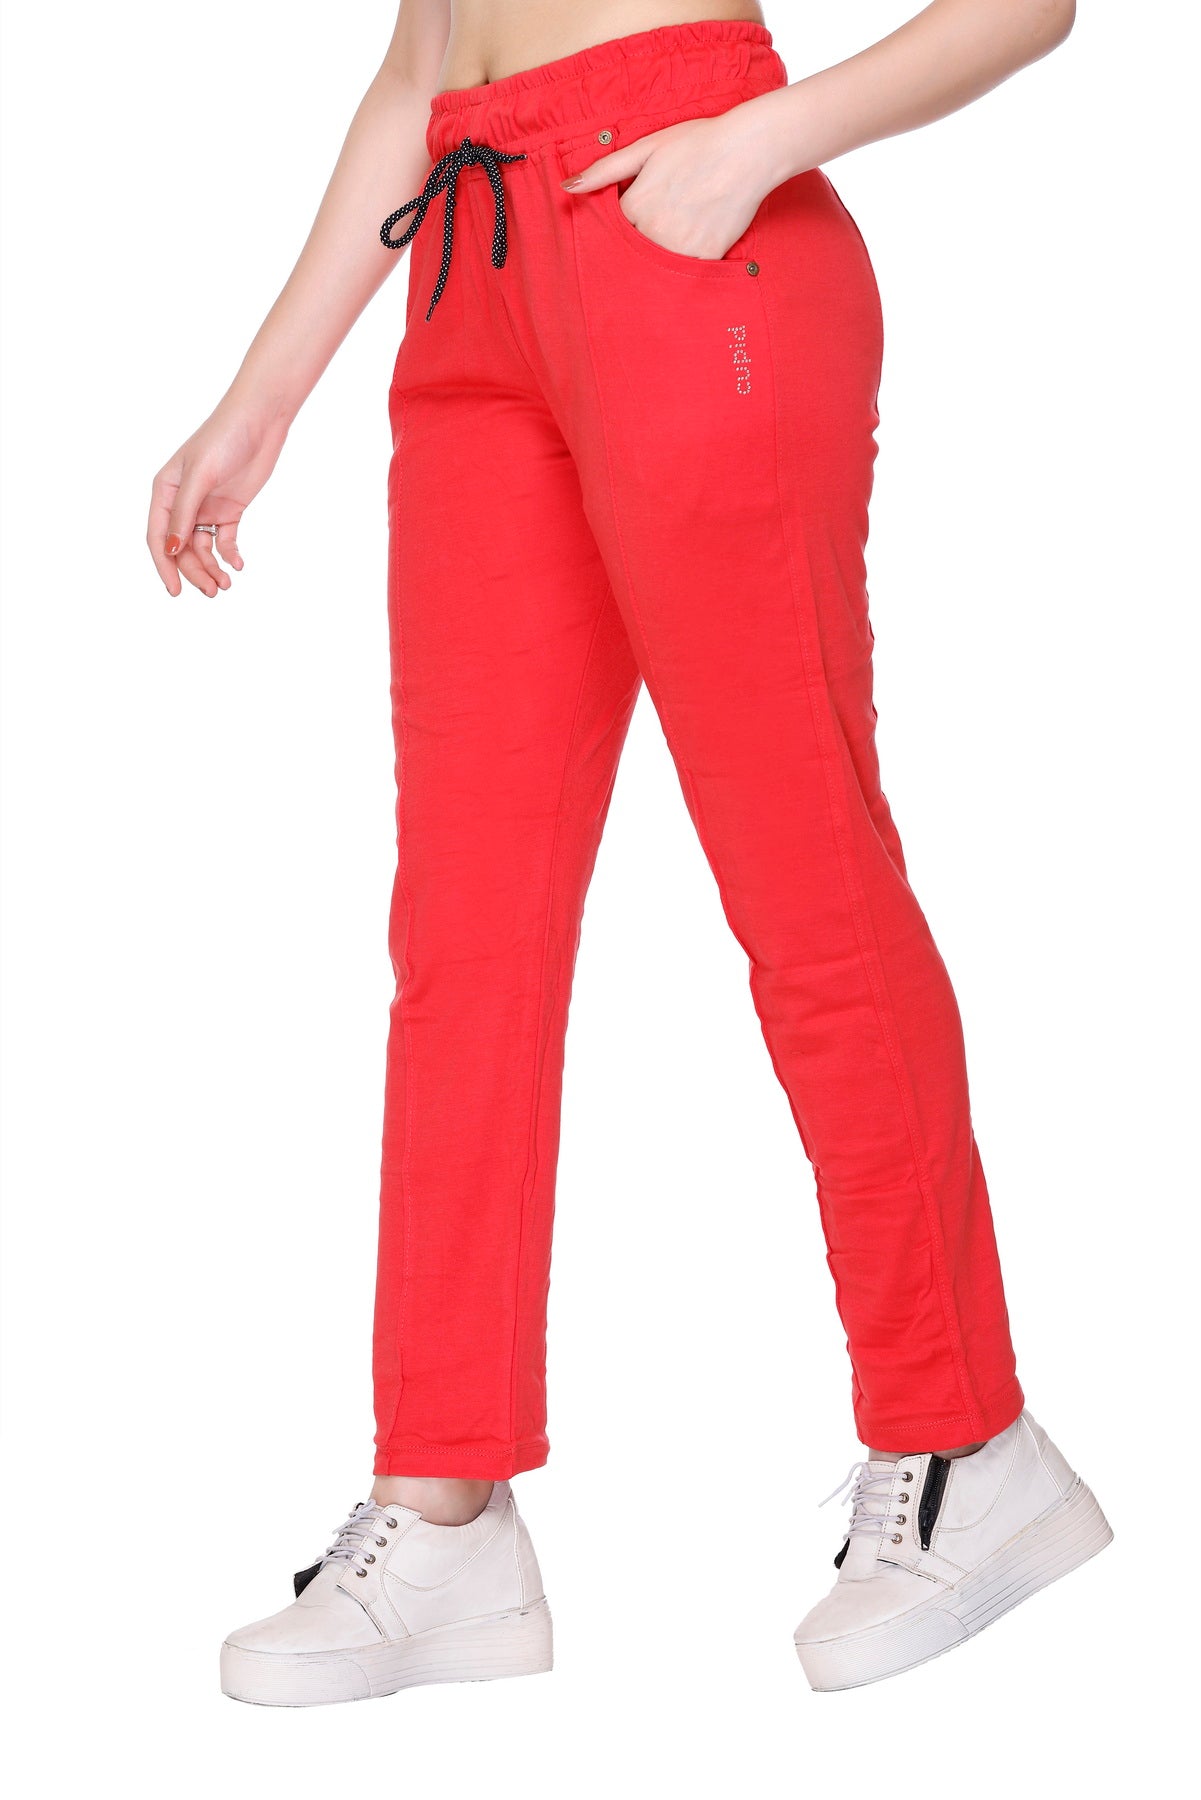 Cotton Track Pants For Women Pack of 2  (Blush Pink/Red)